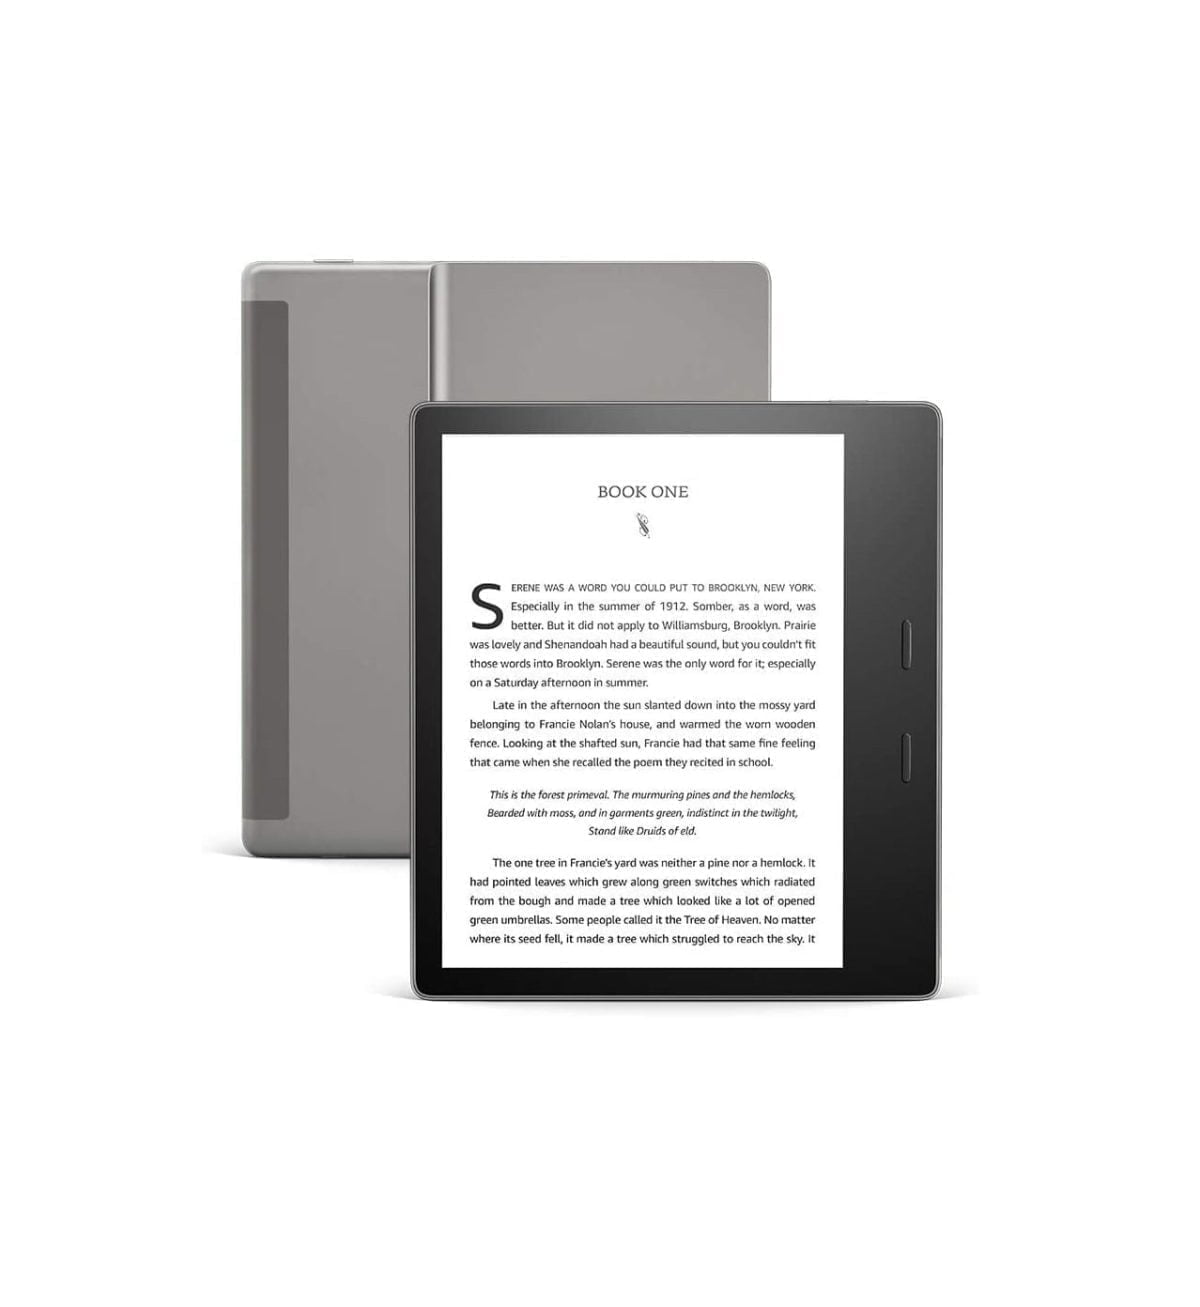 61Hhewtb Rl. Ac Sl1000 Amazon &Amp;Lt;H1&Amp;Gt;All-New Kindle Oasis (10Th Gen), Now With Adjustable Warm Light, 7&Amp;Quot; Display, Waterproof, 32 Gb, Wi-Fi, Graphite&Amp;Lt;/H1&Amp;Gt; &Amp;Lt;Ul Class=&Amp;Quot;A-Unordered-List A-Vertical A-Spacing-Mini&Amp;Quot;&Amp;Gt; &Amp;Lt;Li&Amp;Gt;&Amp;Lt;Span Class=&Amp;Quot;A-List-Item&Amp;Quot;&Amp;Gt;Our Largest, Highest Resolution Display— 7” And 300 Ppi, Glare-Free.&Amp;Lt;/Span&Amp;Gt;&Amp;Lt;/Li&Amp;Gt; &Amp;Lt;Li&Amp;Gt;&Amp;Lt;Span Class=&Amp;Quot;A-List-Item&Amp;Quot;&Amp;Gt;Adjustable Warm Light To Shift Screen Shade From White To Amber.&Amp;Lt;/Span&Amp;Gt;&Amp;Lt;/Li&Amp;Gt; &Amp;Lt;Li&Amp;Gt;&Amp;Lt;Span Class=&Amp;Quot;A-List-Item&Amp;Quot;&Amp;Gt;Waterproof (Ipx8) So You Can Read In The Bath Or By The Pool.&Amp;Lt;/Span&Amp;Gt;&Amp;Lt;/Li&Amp;Gt; &Amp;Lt;Li&Amp;Gt;&Amp;Lt;Span Class=&Amp;Quot;A-List-Item&Amp;Quot;&Amp;Gt;Thin And Light Ergonomic Design With Dedicated Page Turn Buttons.&Amp;Lt;/Span&Amp;Gt;&Amp;Lt;/Li&Amp;Gt; &Amp;Lt;Li&Amp;Gt;&Amp;Lt;Span Class=&Amp;Quot;A-List-Item&Amp;Quot;&Amp;Gt;Reads Like Real Paper With The Latest E-Ink Technology For Fast Page Turns.&Amp;Lt;/Span&Amp;Gt;&Amp;Lt;/Li&Amp;Gt; &Amp;Lt;Li&Amp;Gt;&Amp;Lt;Span Class=&Amp;Quot;A-List-Item&Amp;Quot;&Amp;Gt;Keep Reading - A Single Charge Lasts Weeks, Not Hours.&Amp;Lt;/Span&Amp;Gt;&Amp;Lt;/Li&Amp;Gt; &Amp;Lt;Li&Amp;Gt;&Amp;Lt;Span Class=&Amp;Quot;A-List-Item&Amp;Quot;&Amp;Gt;Browse Over 1 Million Ebooks In The Kindle Store On Amazon Us, Including Thousands Of Arabic Titles.&Amp;Lt;/Span&Amp;Gt;&Amp;Lt;/Li&Amp;Gt; &Amp;Lt;/Ul&Amp;Gt; All-New Kindle Oasis (10Th Gen), Now With Adjustable Warm Light, 7&Amp;Quot; Display, Waterproof, 32 Gb, Wi-Fi, Graphite